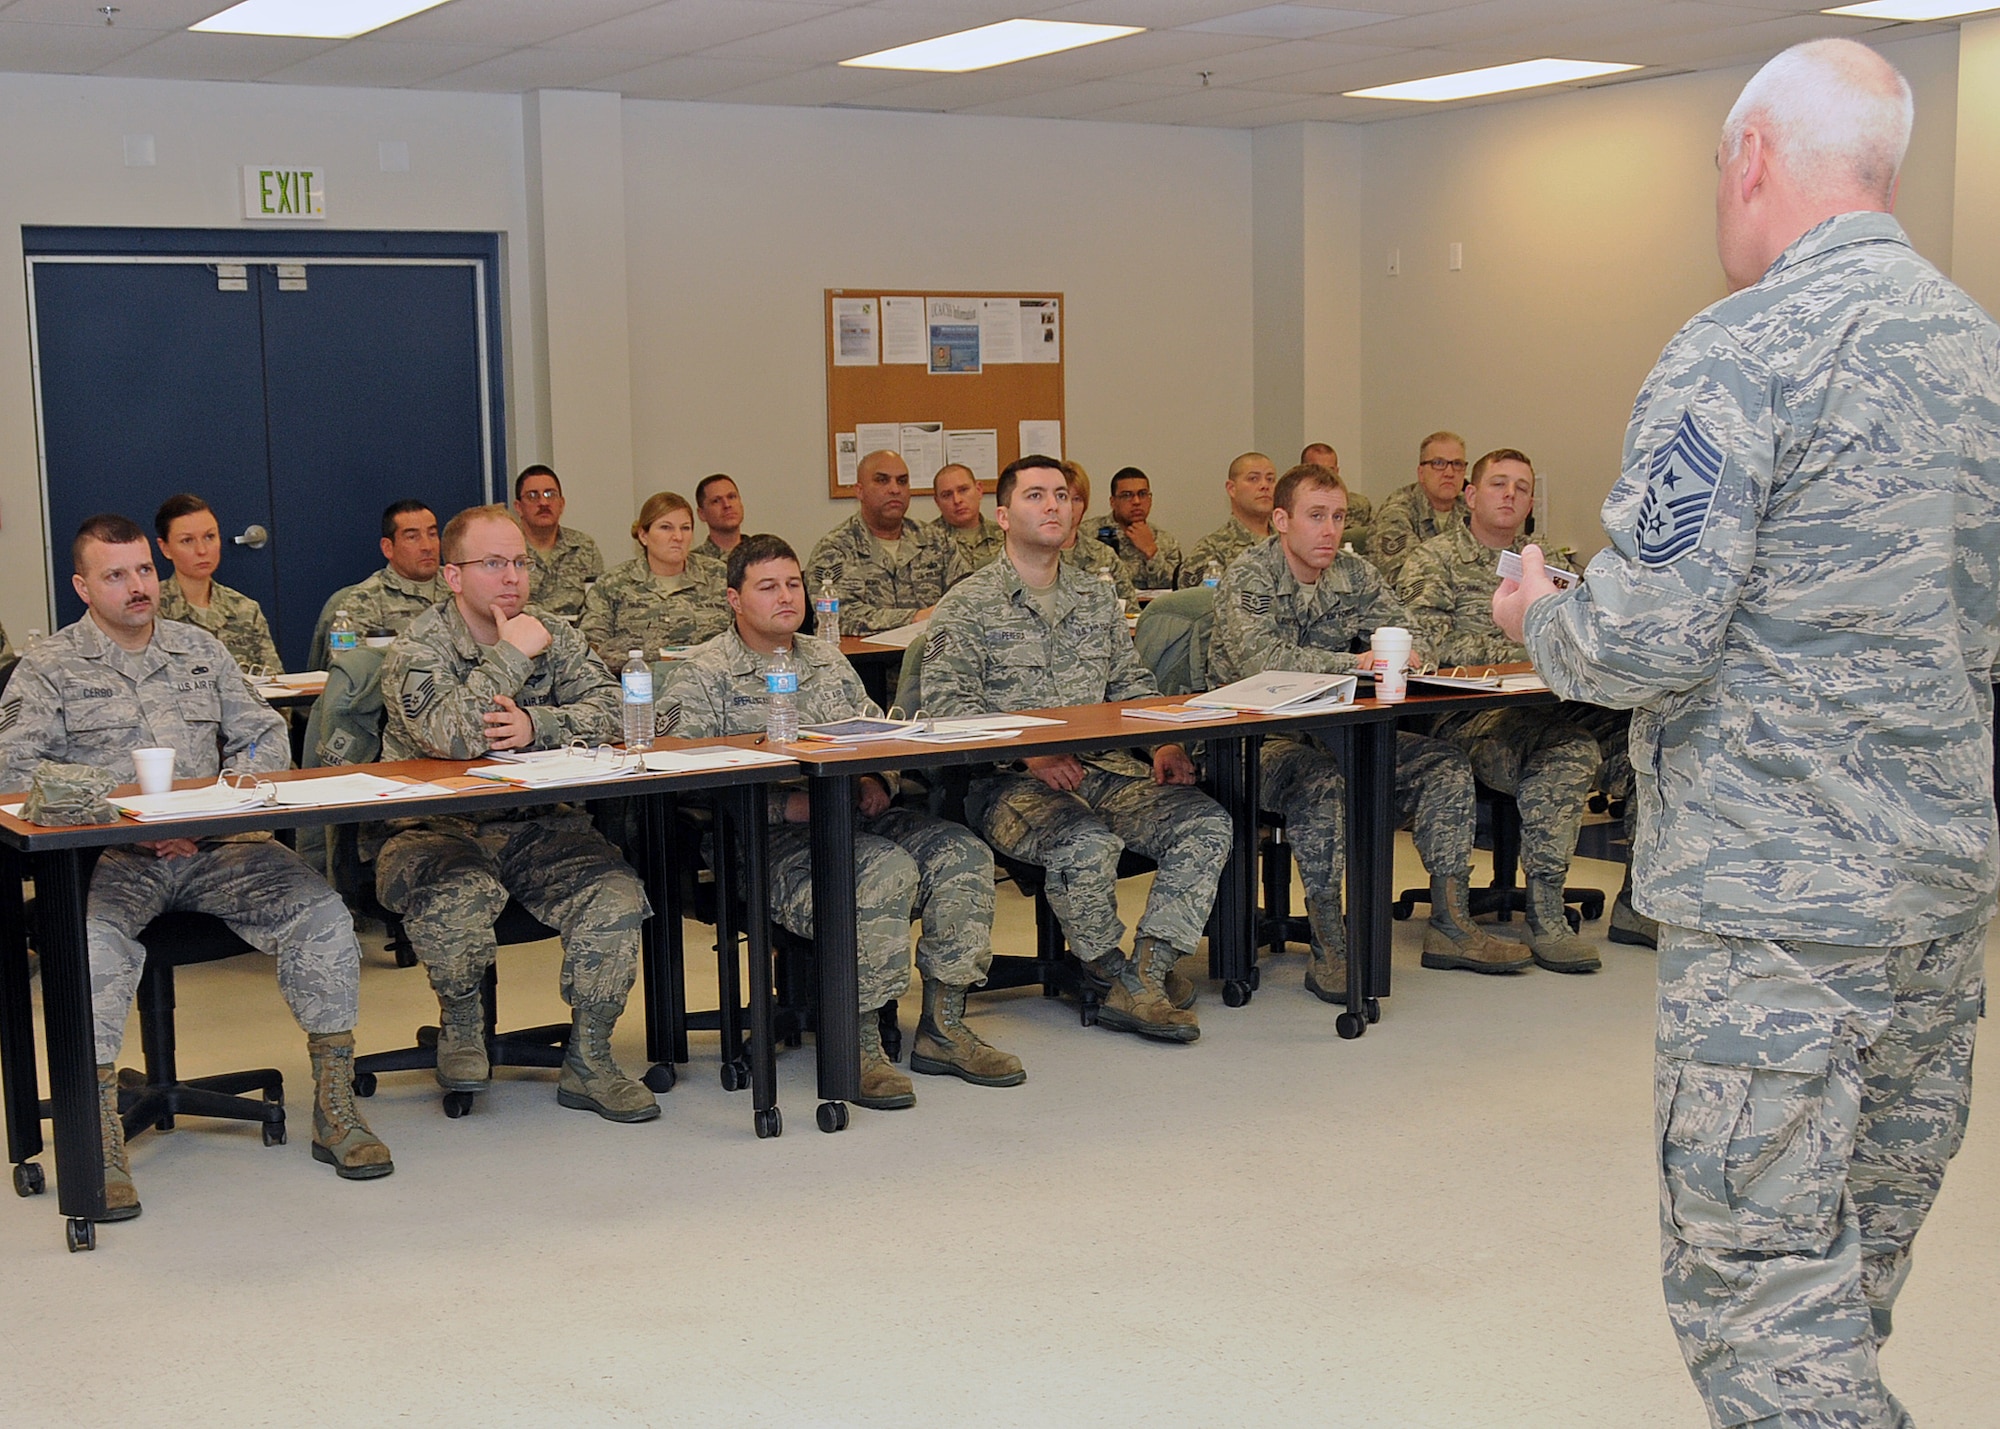 Chief Master Sergeant Michael Brady, State Command Chief, Rhode Island Air National Guard, addresses the attendees of the inaugural Leadership Development Course hosted by the RIANG Senior Non-Commissioned Officer Council at Quonset Air National Guard Base, North Kingstown, RI on January 21, 2015. National Guard Photo by Master Sgt Janeen Miller (RELEASED)